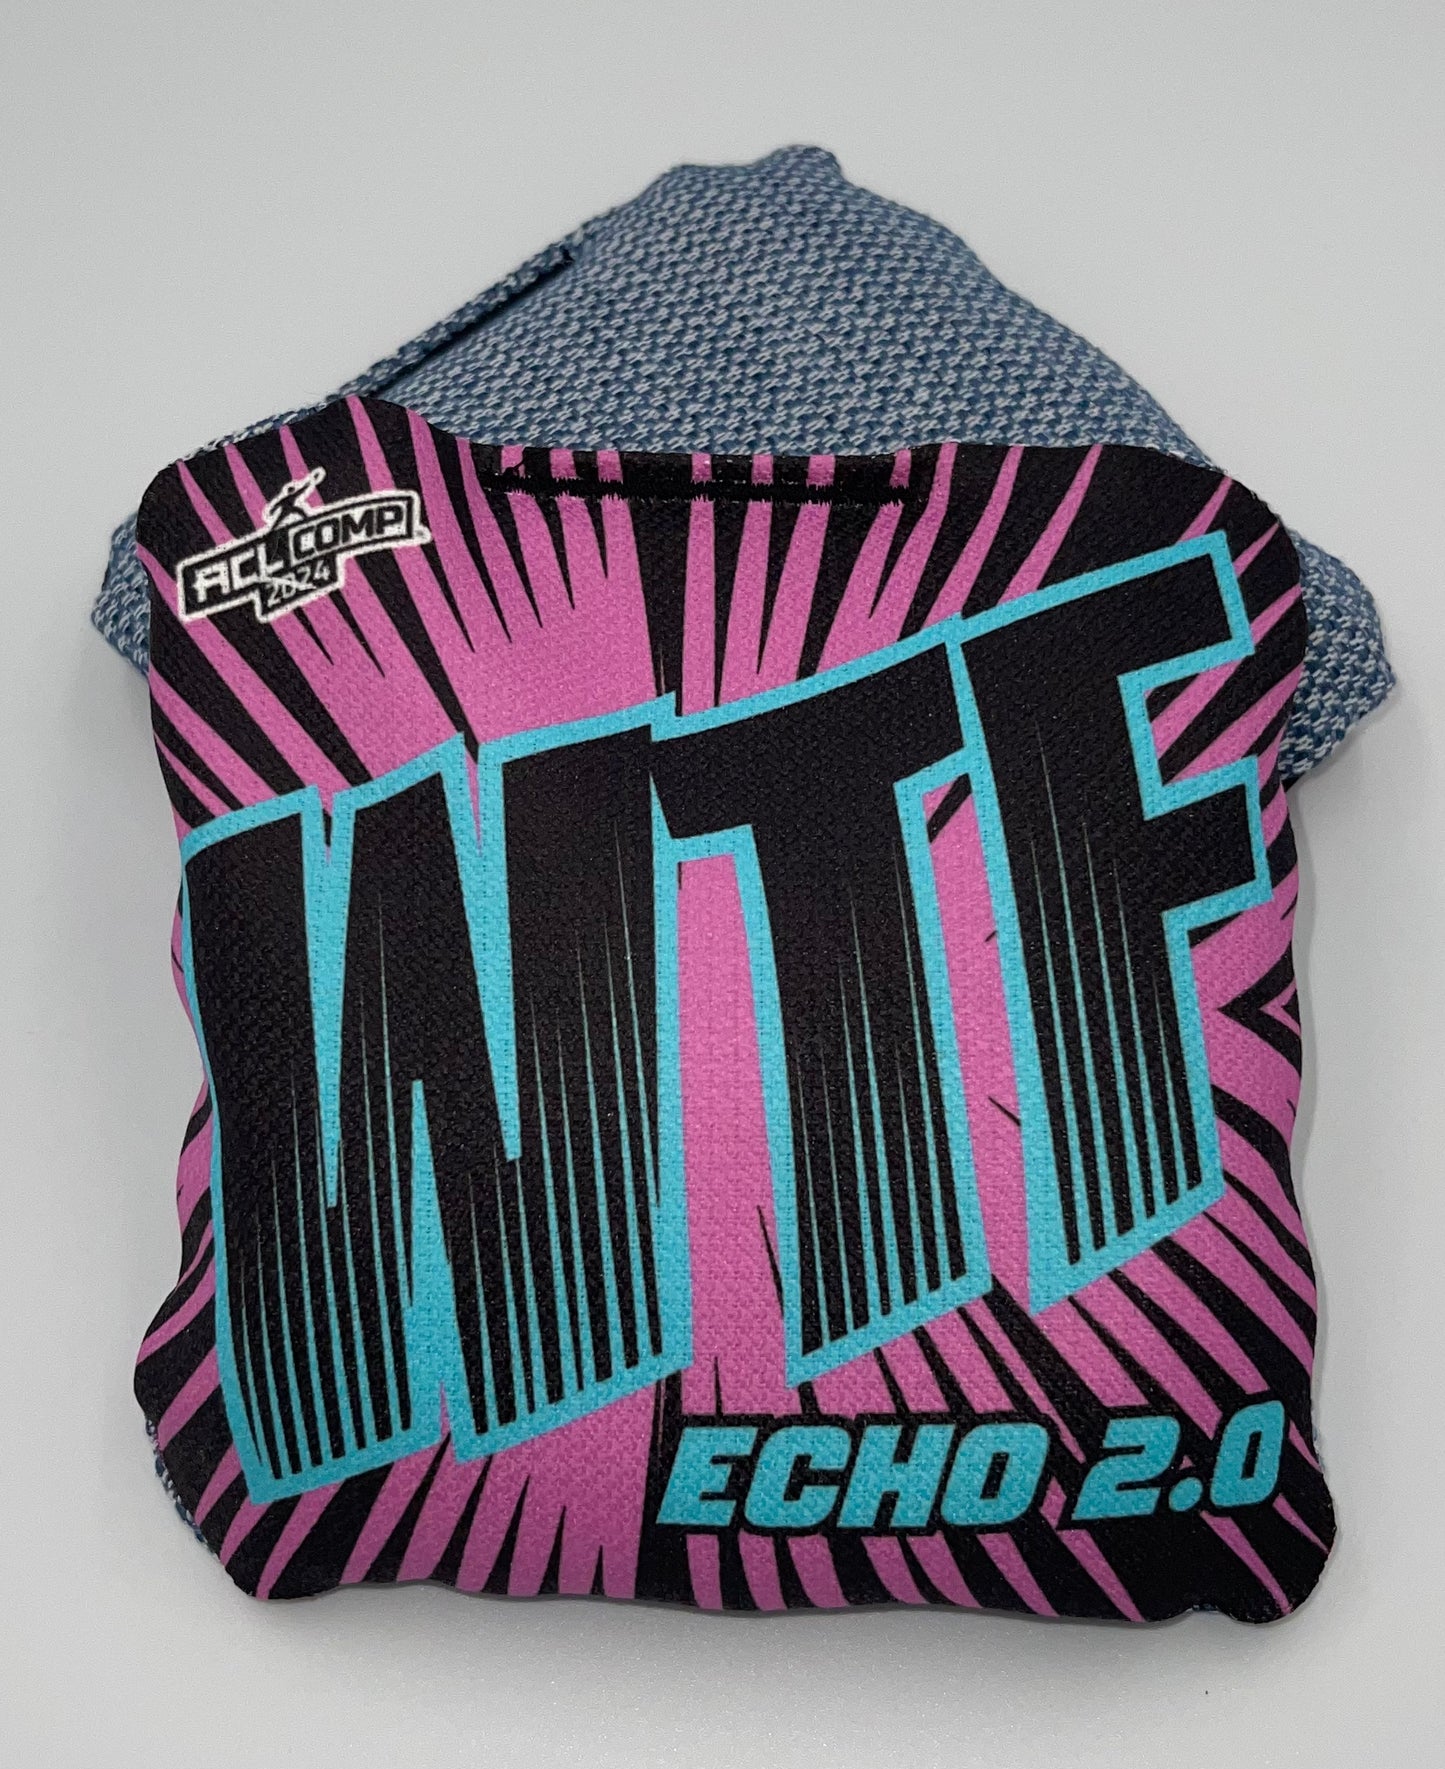 Echo 2.0 - ACL Comp Stamped Cornhole Bags - Set of 4 bags